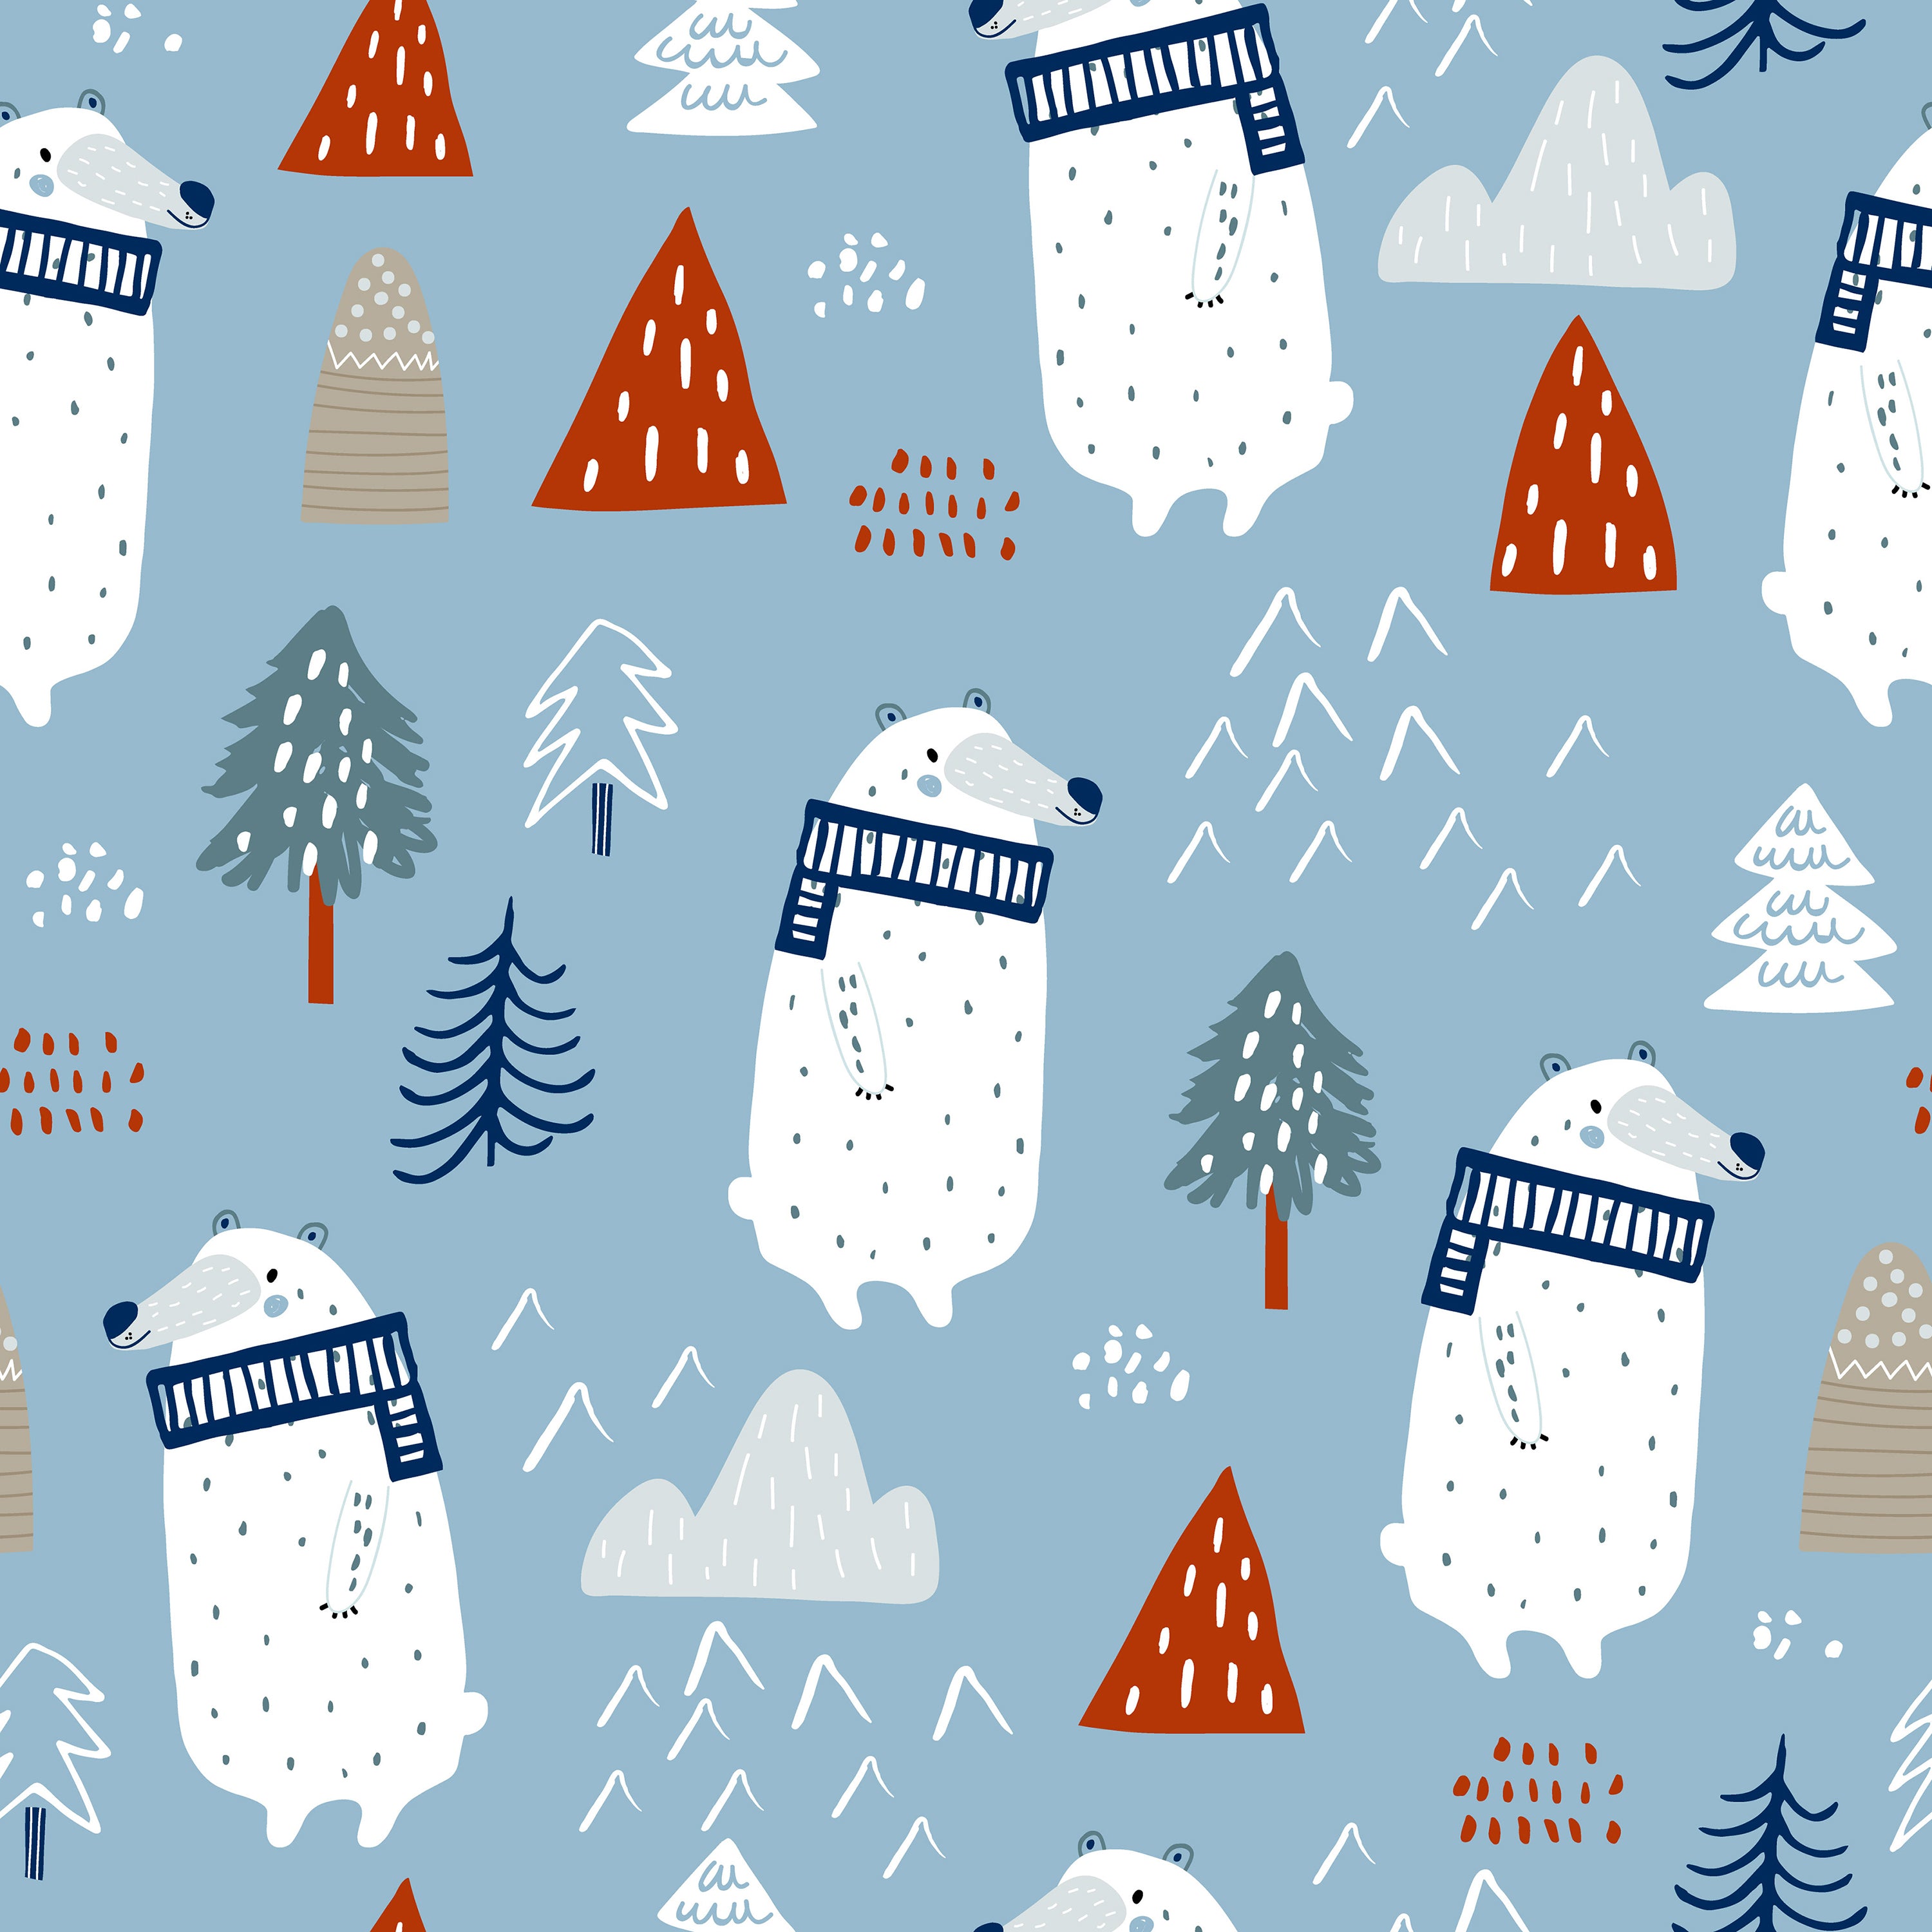 A playful and charming wallpaper design featuring stylized polar bears wearing striped scarves, interspersed with abstract trees and mountains on a soft blue background. The bears are whimsically illustrated in white with simple black details, creating a friendly and inviting winter scene.